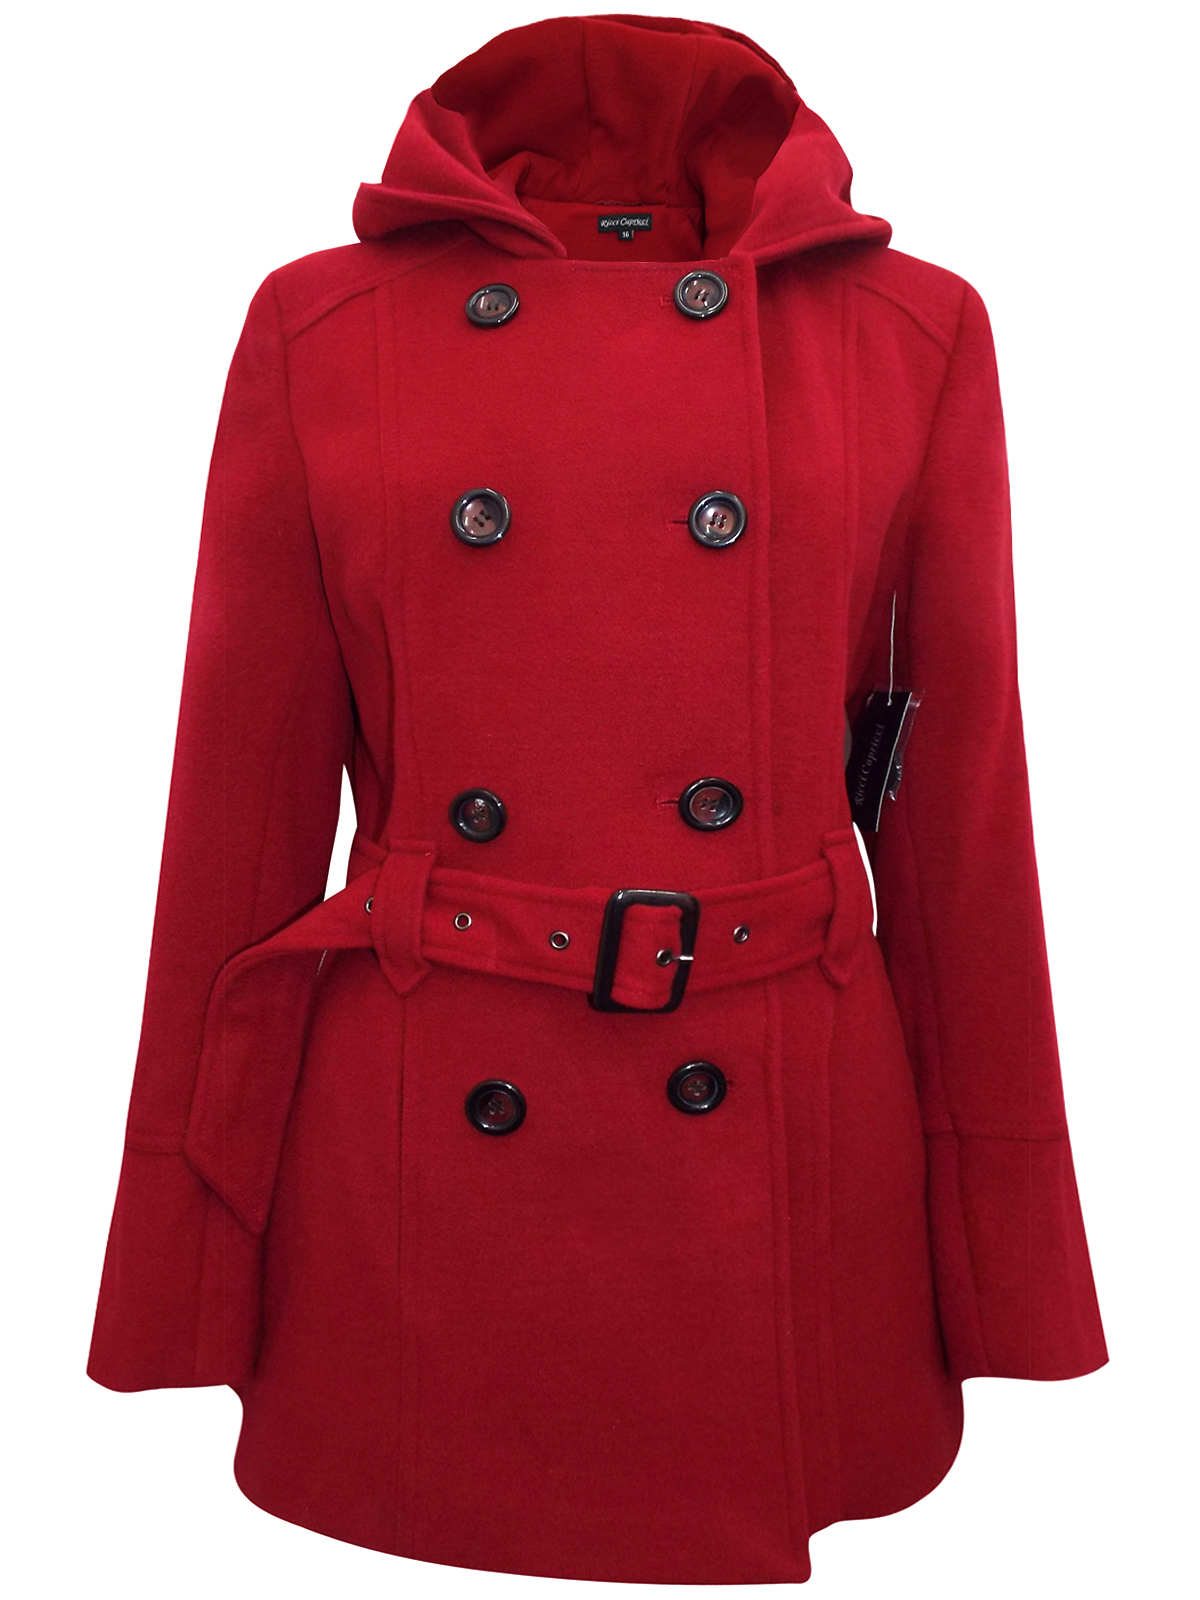 Ricci Capricci - - Ricci Capricci RED Double Breasted Hooded Coat with ...